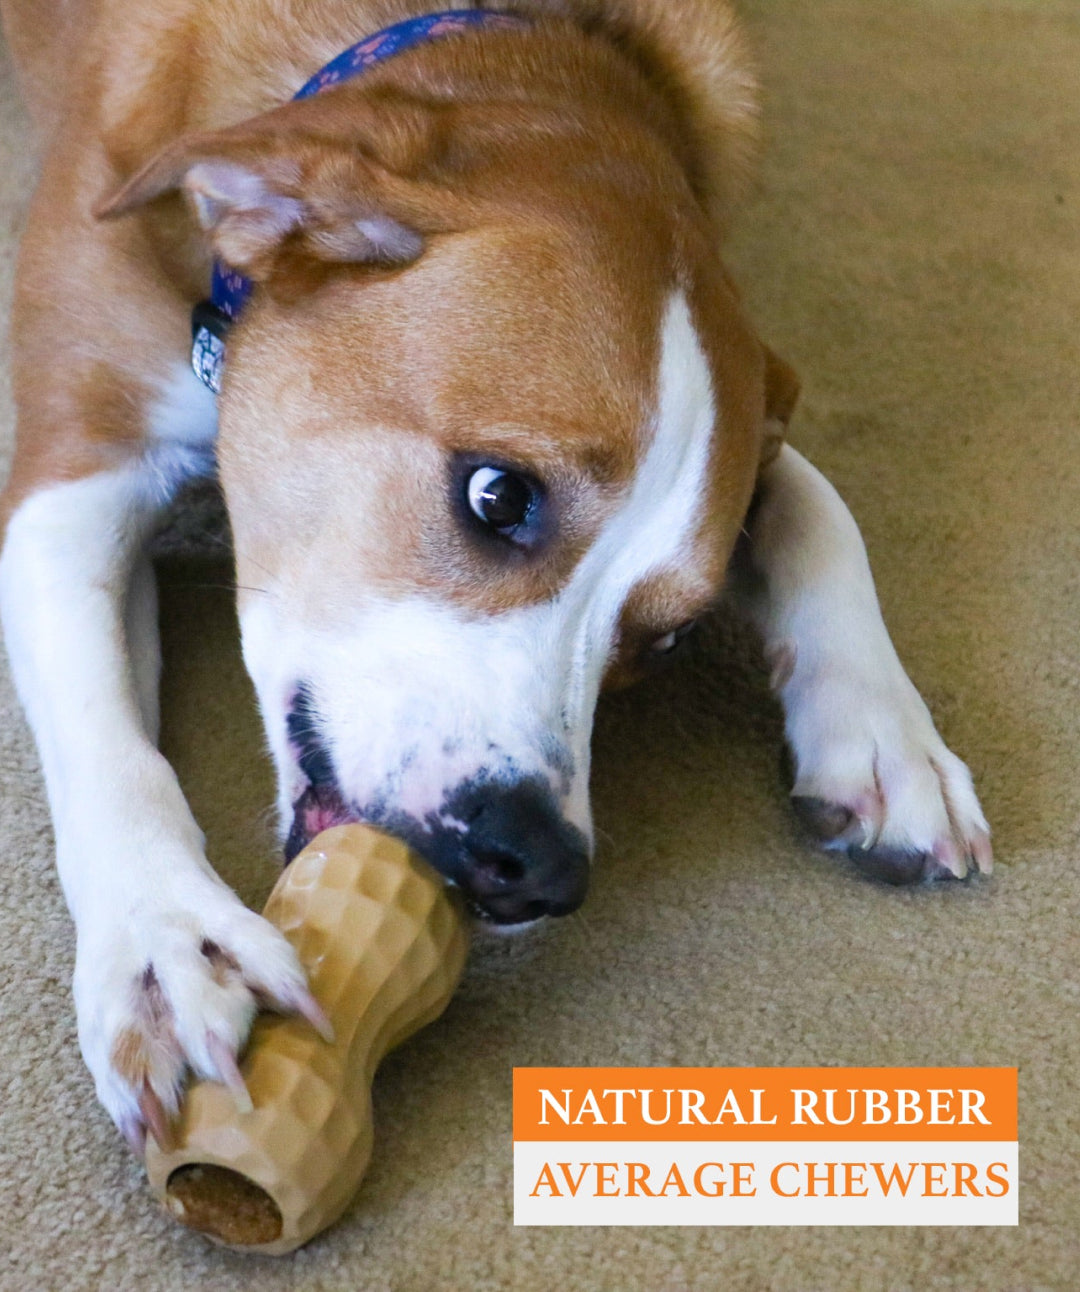 Poochie Butter Busy Dog Toy & Treat Bundle – Rover Store